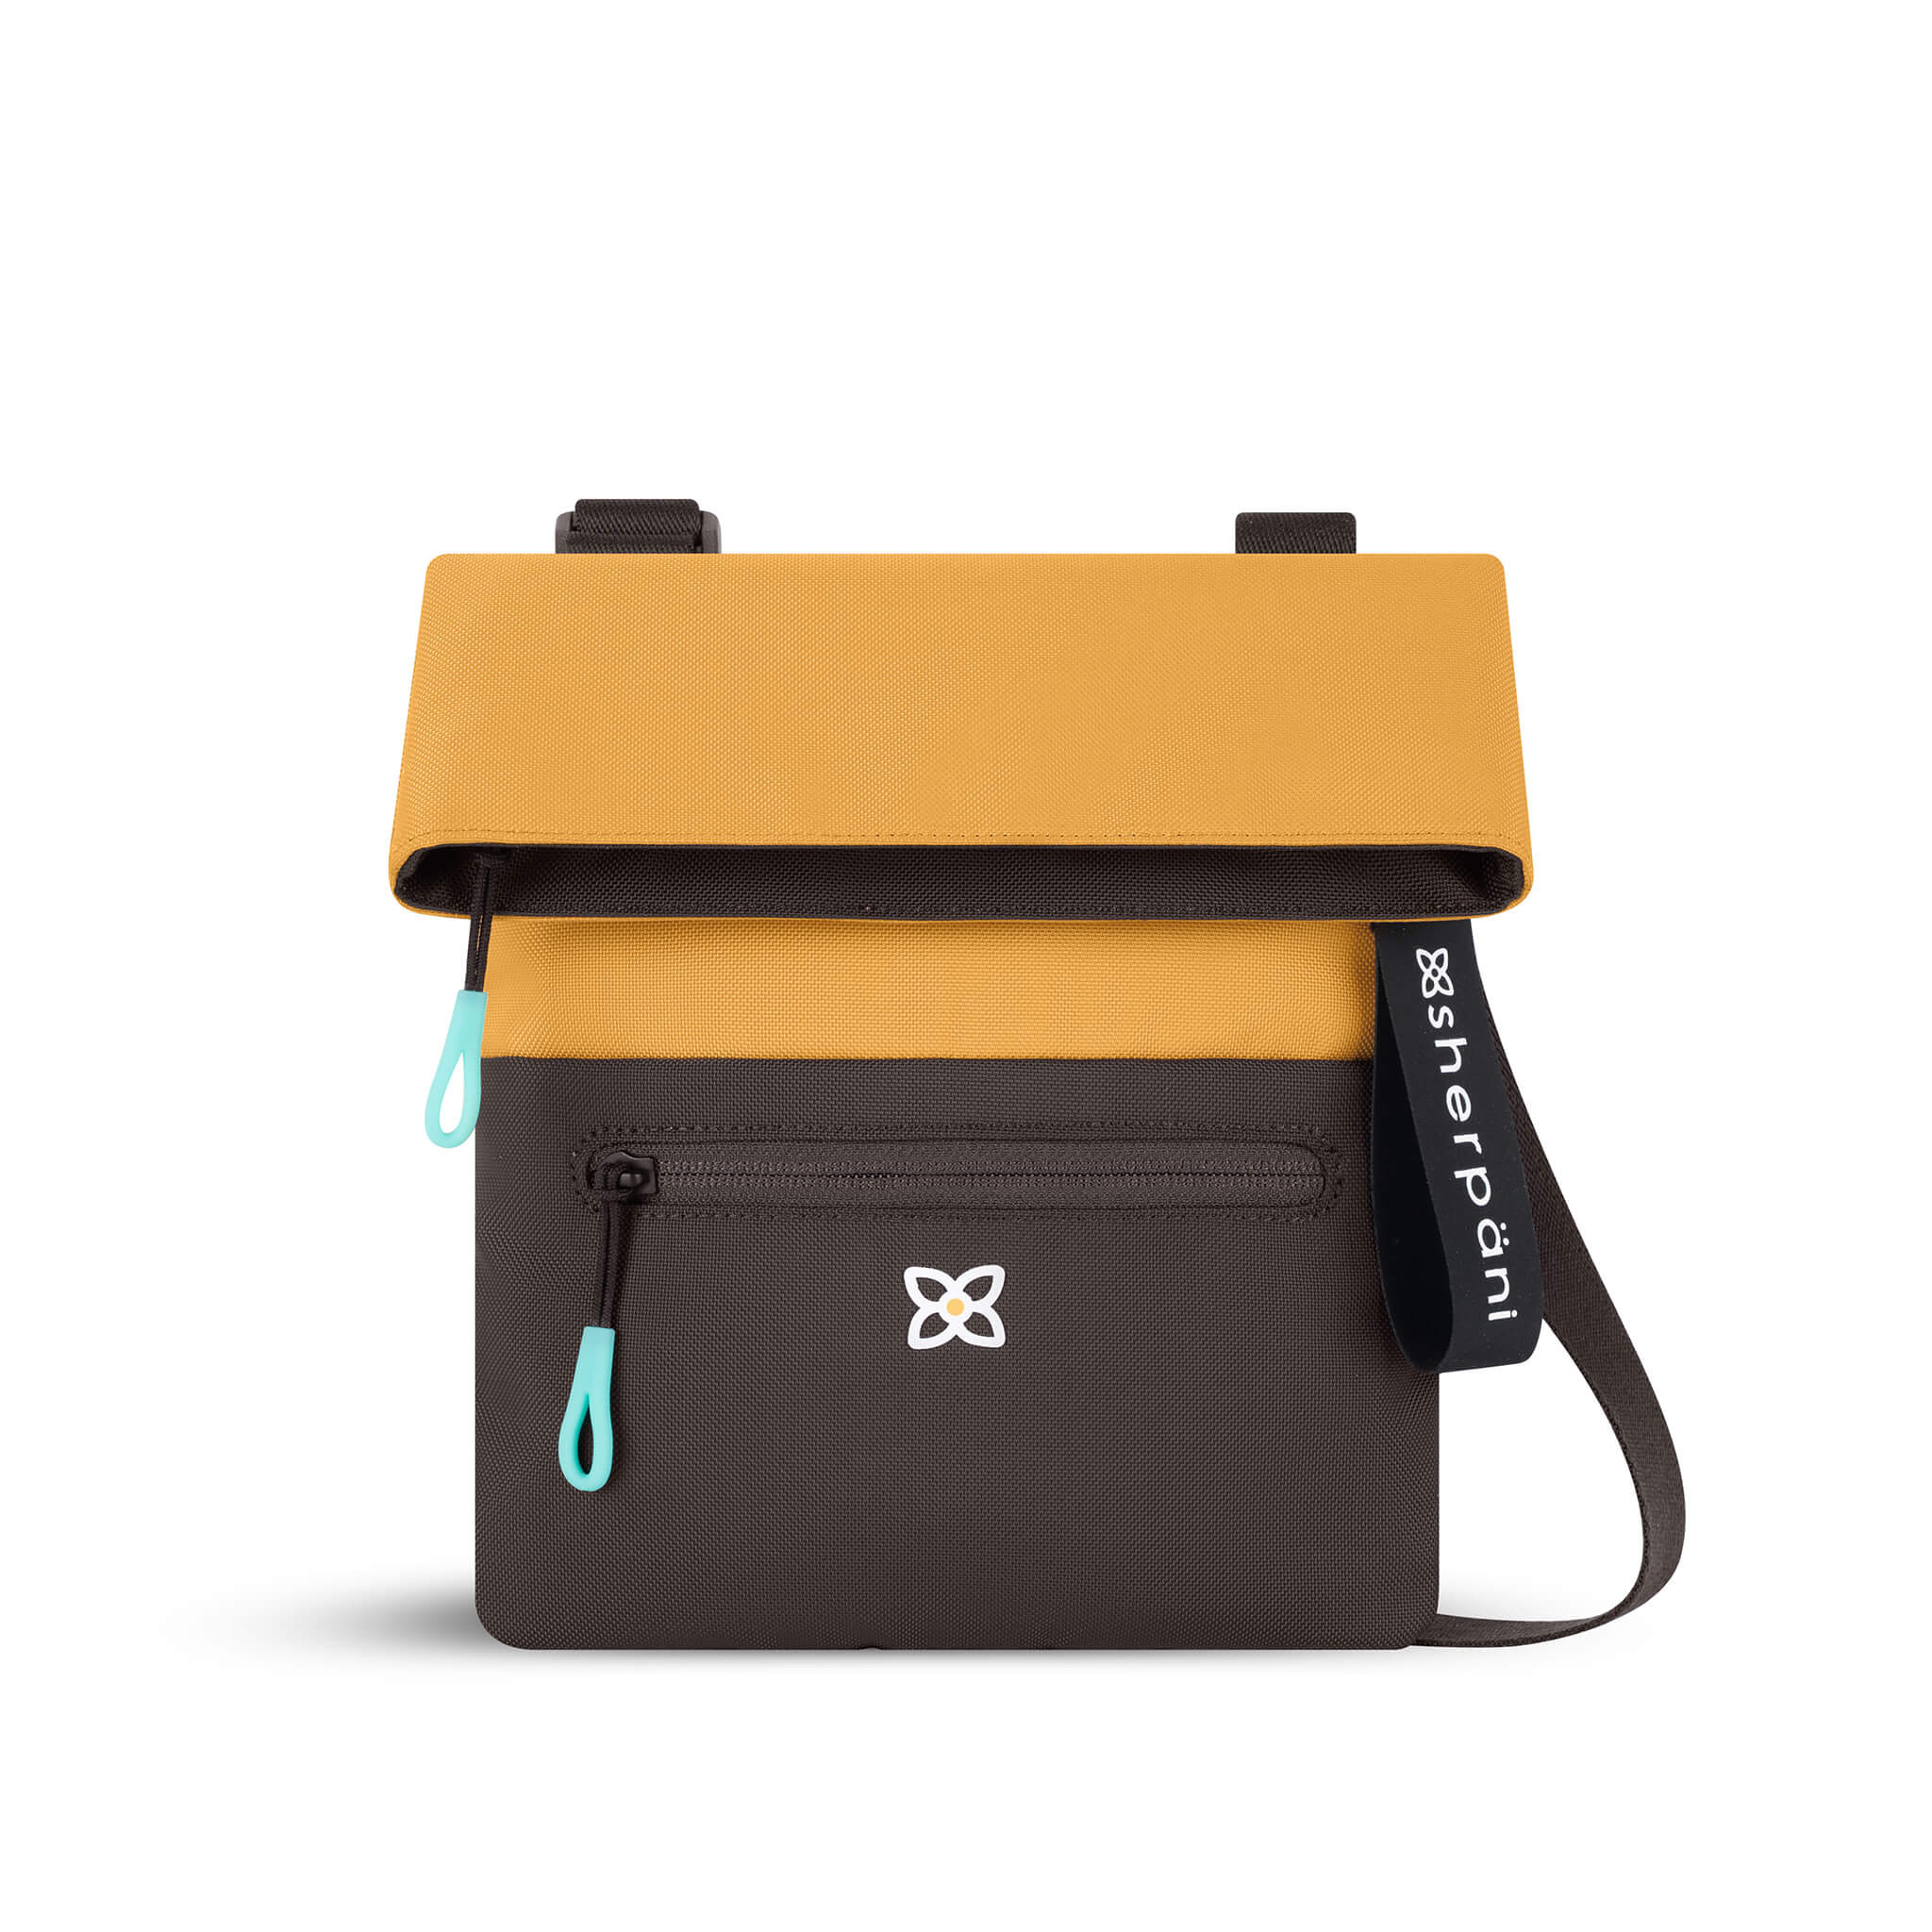 Flat front view of Sherpani fold over crossbody bag, the Pica in Sundial. Pica features include an adjustable crossbody strap, outside zipper pocket, back flap pocket, inside zipper pocket and slip pocket, detachable keychain and RFID protection. The Sundial coloway is two-toned in yellow and dark brown with turquoise accents. 